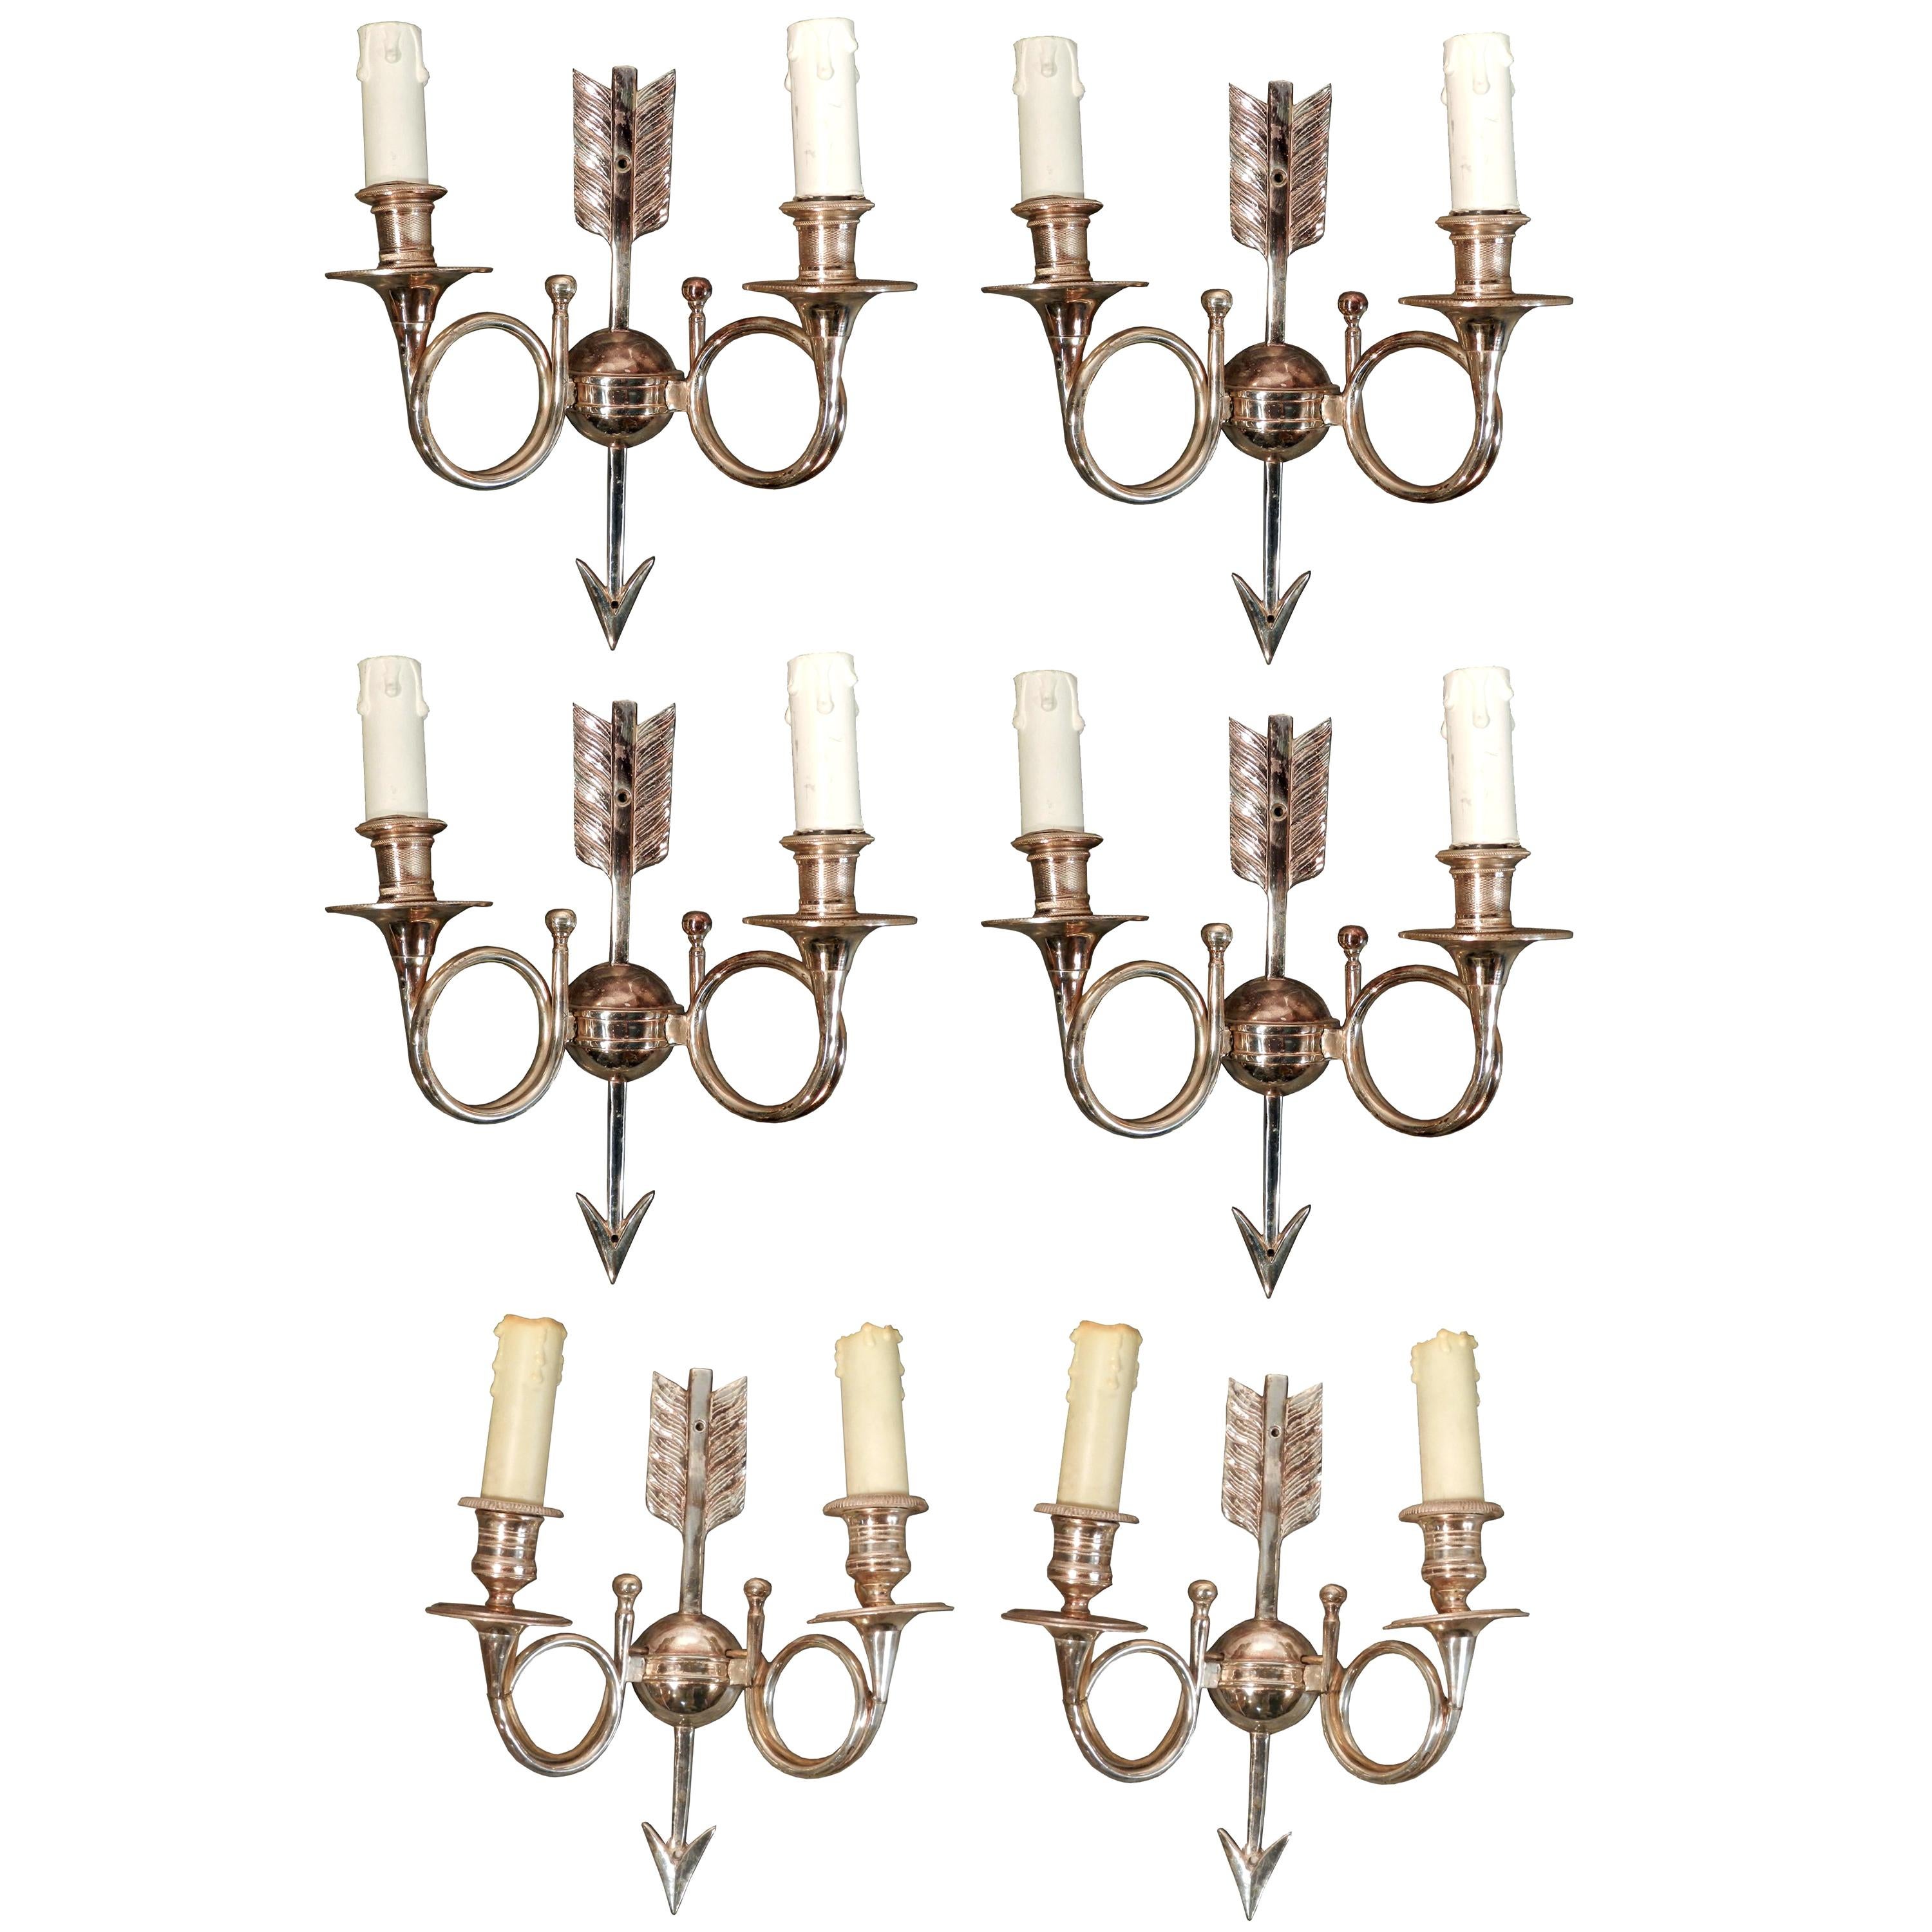 Six Silvered Bronze Sconces with Monogram and Number, circa 1960